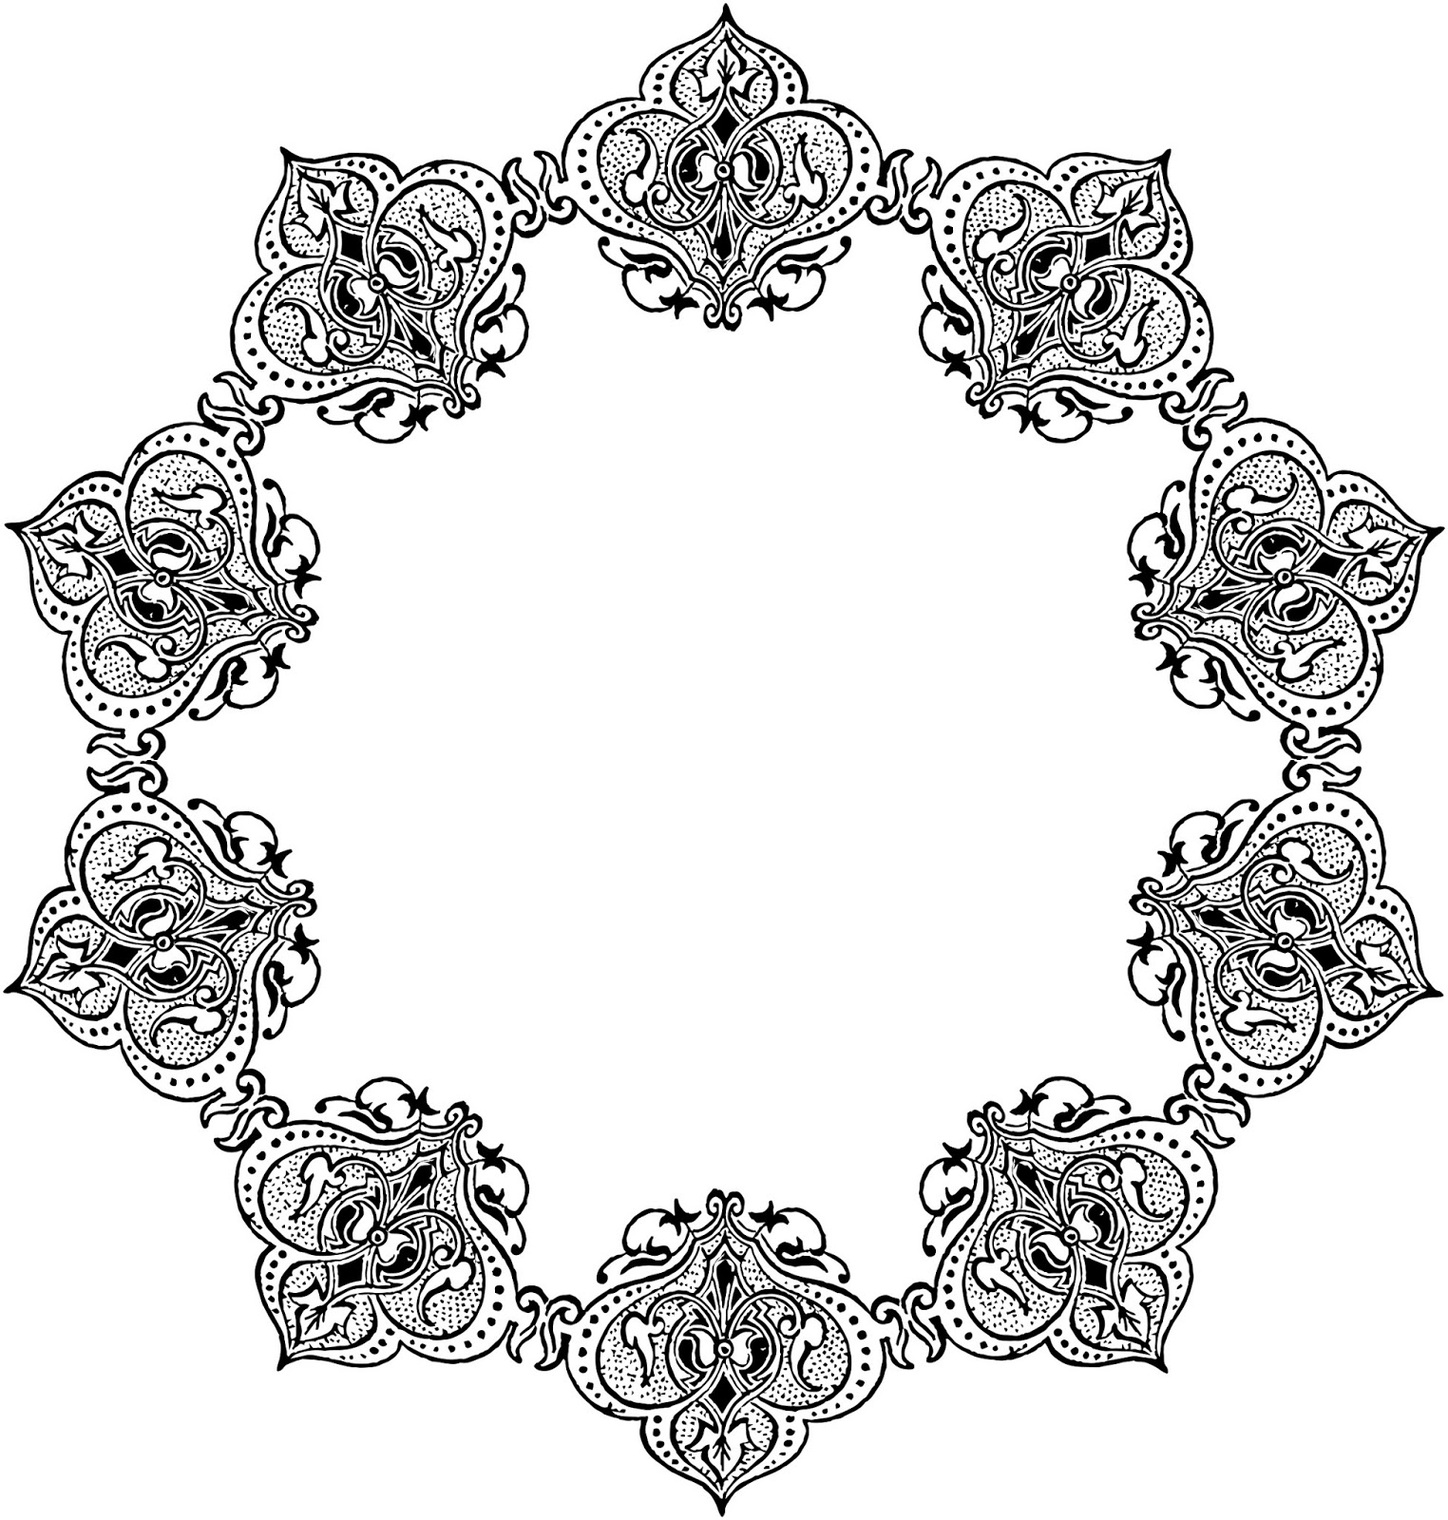 Damask Border Clip Art Free Clipart - Free to use Clip Art Resource